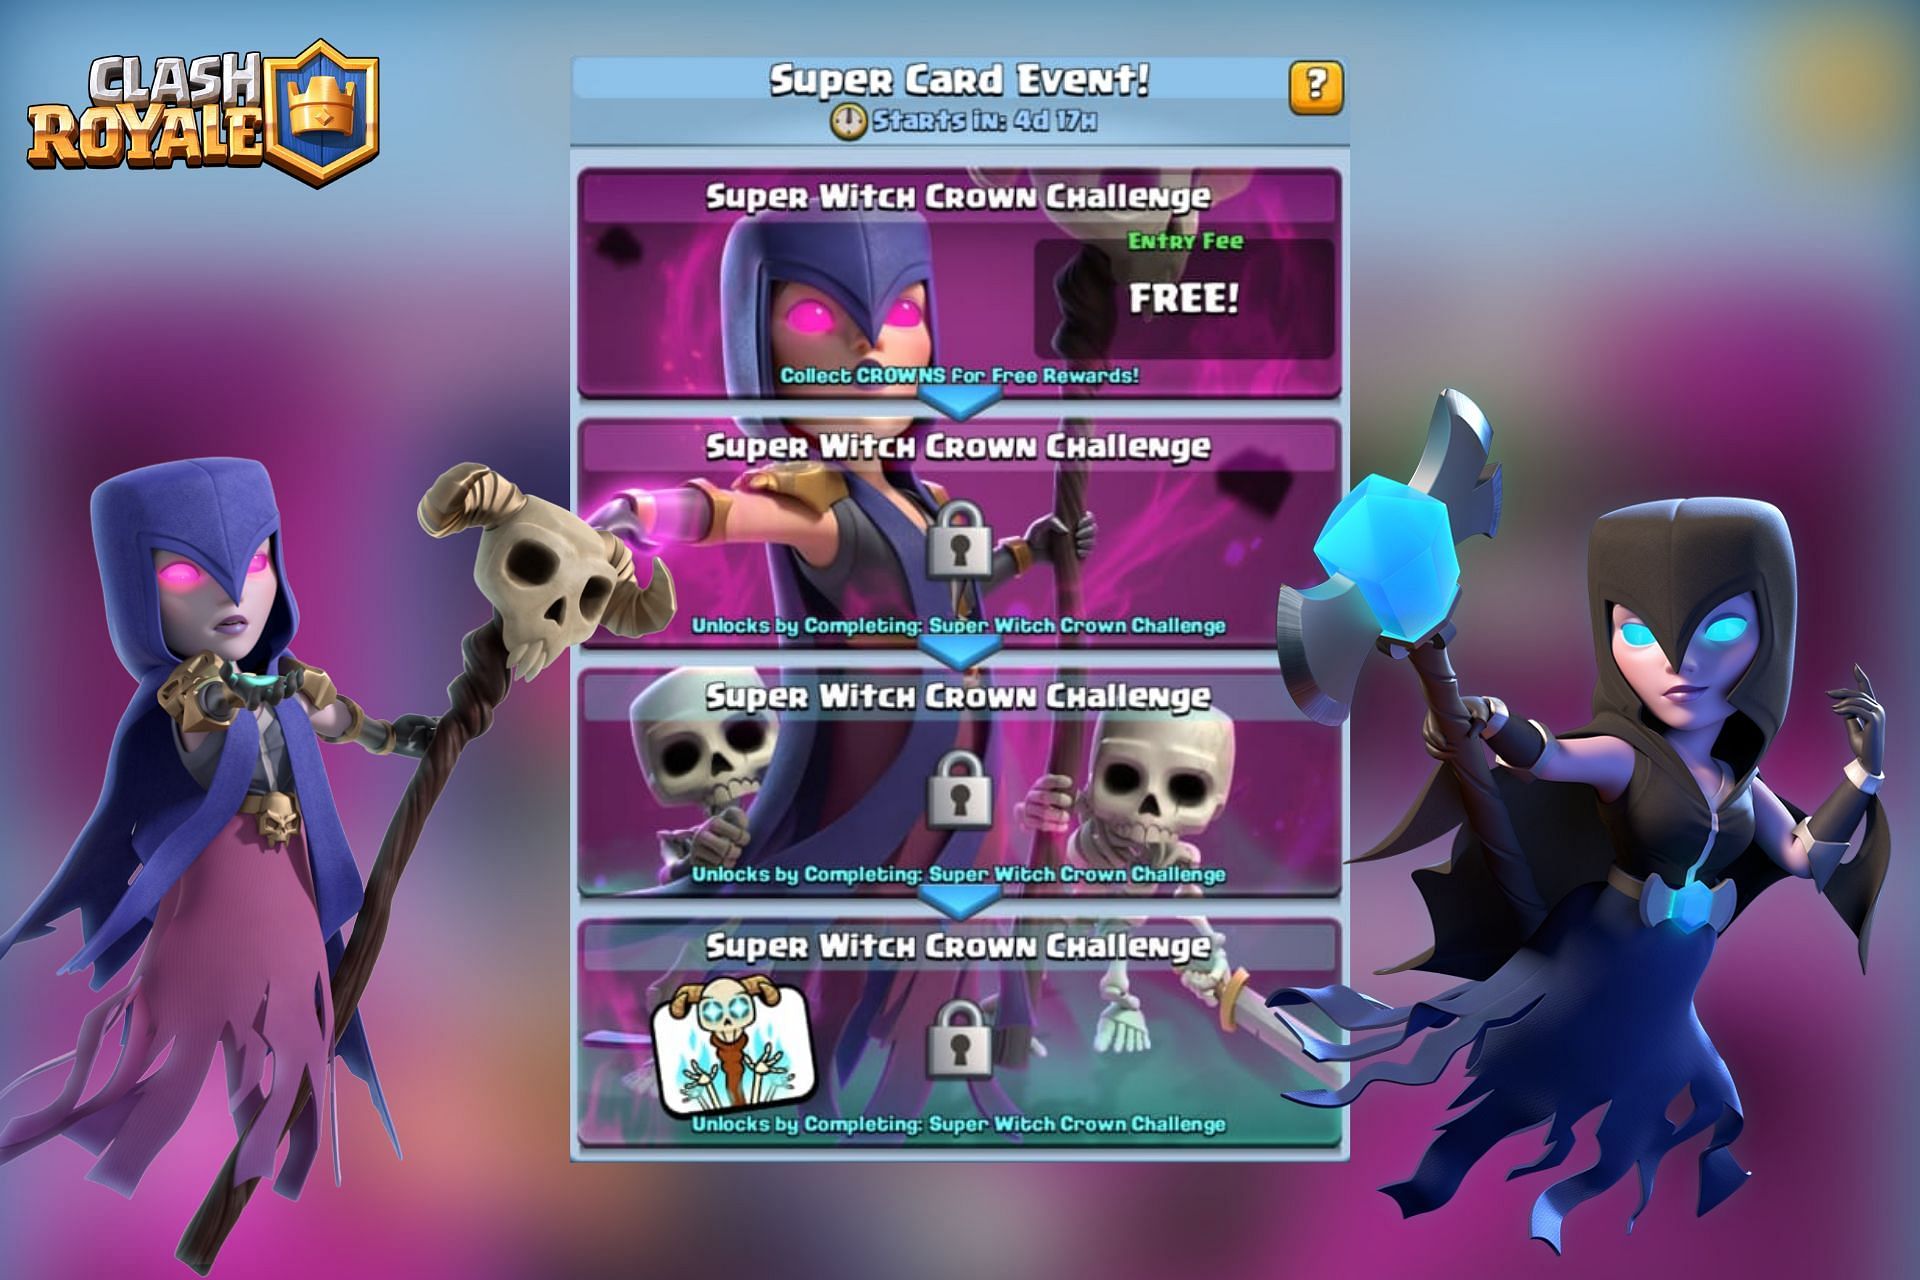 The Super Witch Crown challenge in Clash Royale includes four sub-challenges (Image via Sportskeeda)